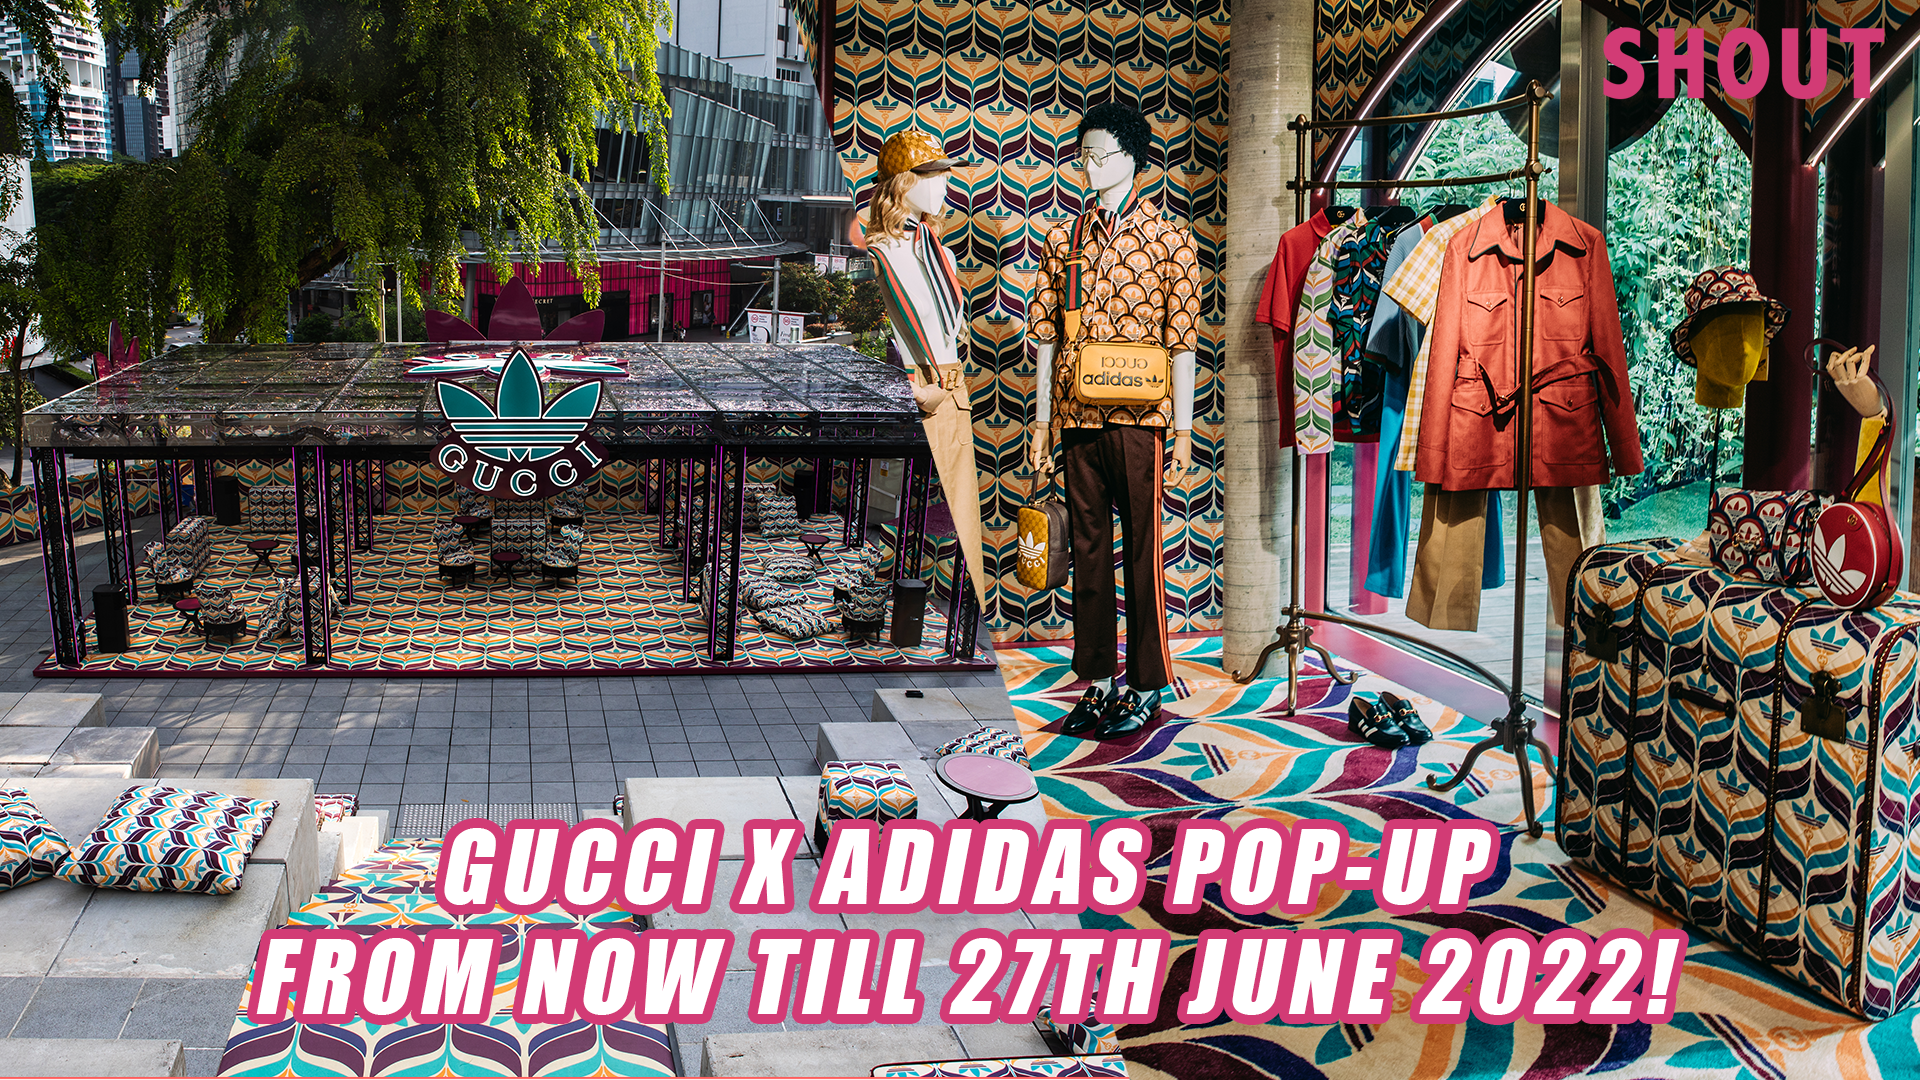 EXCLUSIVE GUCCI X ADIDAS POP-UP WITH FREE ICE CREAM, MINI GOLF, GOLF BUGGY,  INSTAGRAMMABLE PHOTO-OPS & MORE! - Shout